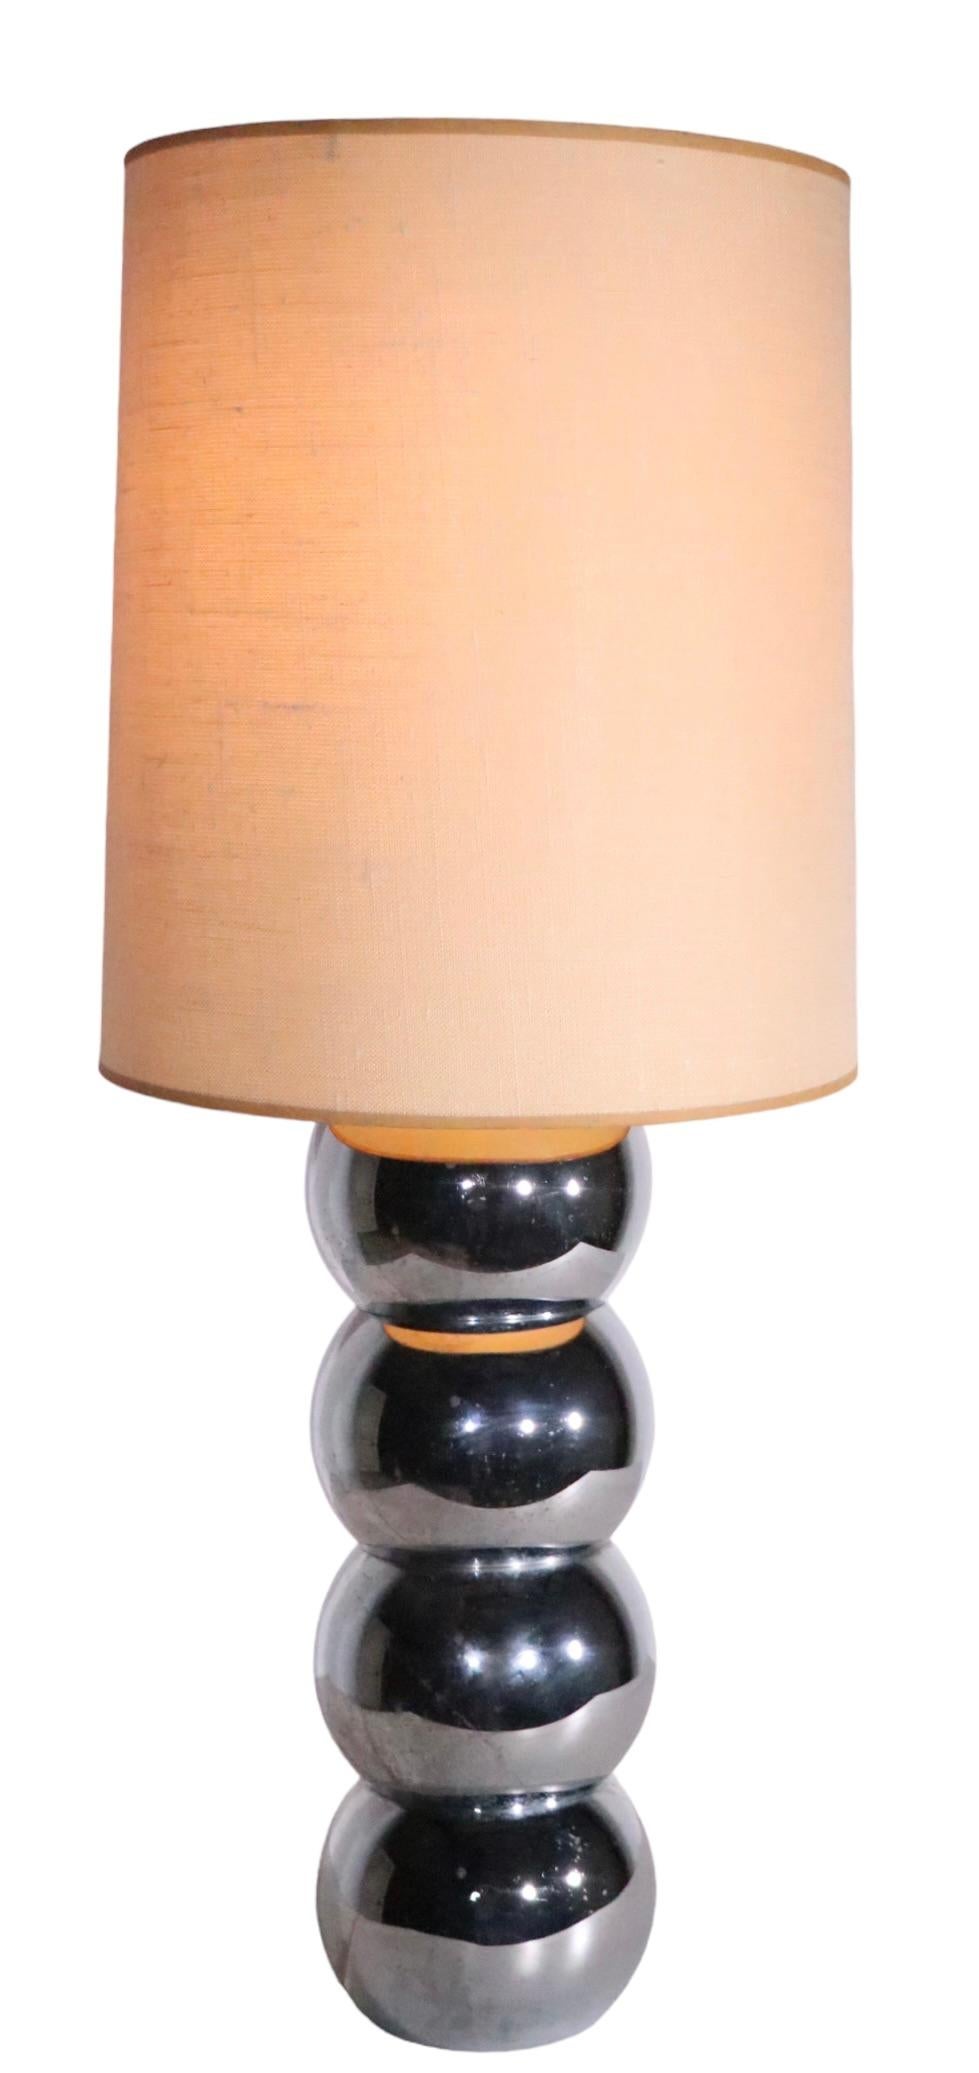 Classic chrome  stacked ball table lamp by George Kovacs, circa 1970's. This example is in very good original, clean and working condition, showing only light cosmetic wear, normal and consistent with age.
 Total H 32 x H to top of chrome balls 18 x